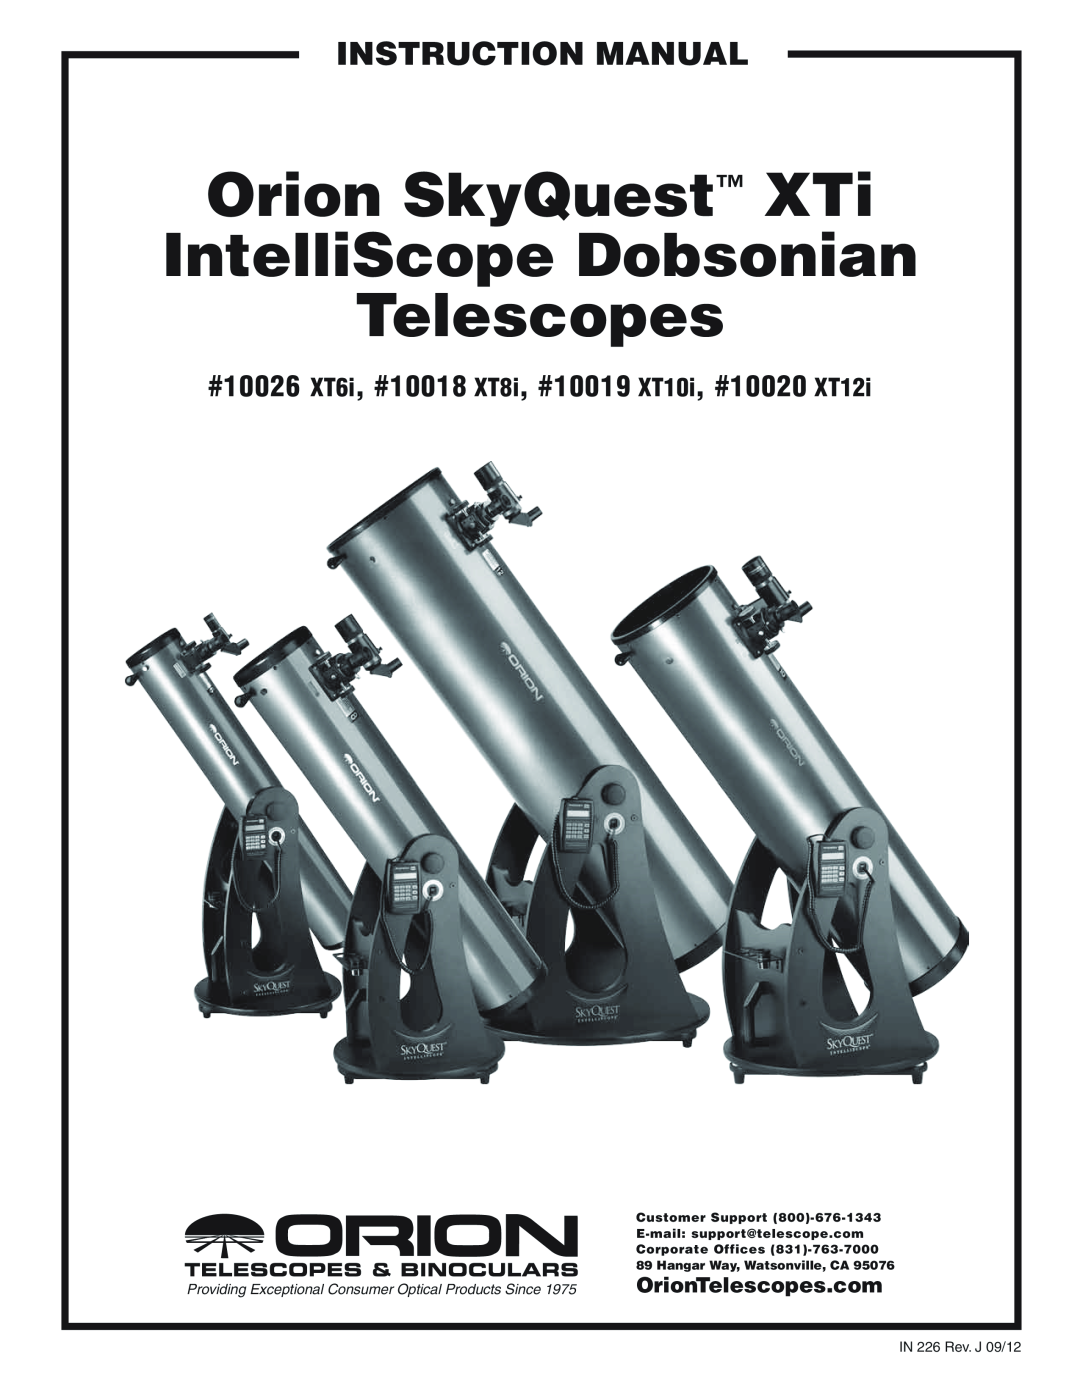 Orion 10020 XT12i instruction manual OrionTelescopes.com, Orion SkyQuest XTi, IntelliScope Dobsonian, IN 226 Rev. J 09/12 